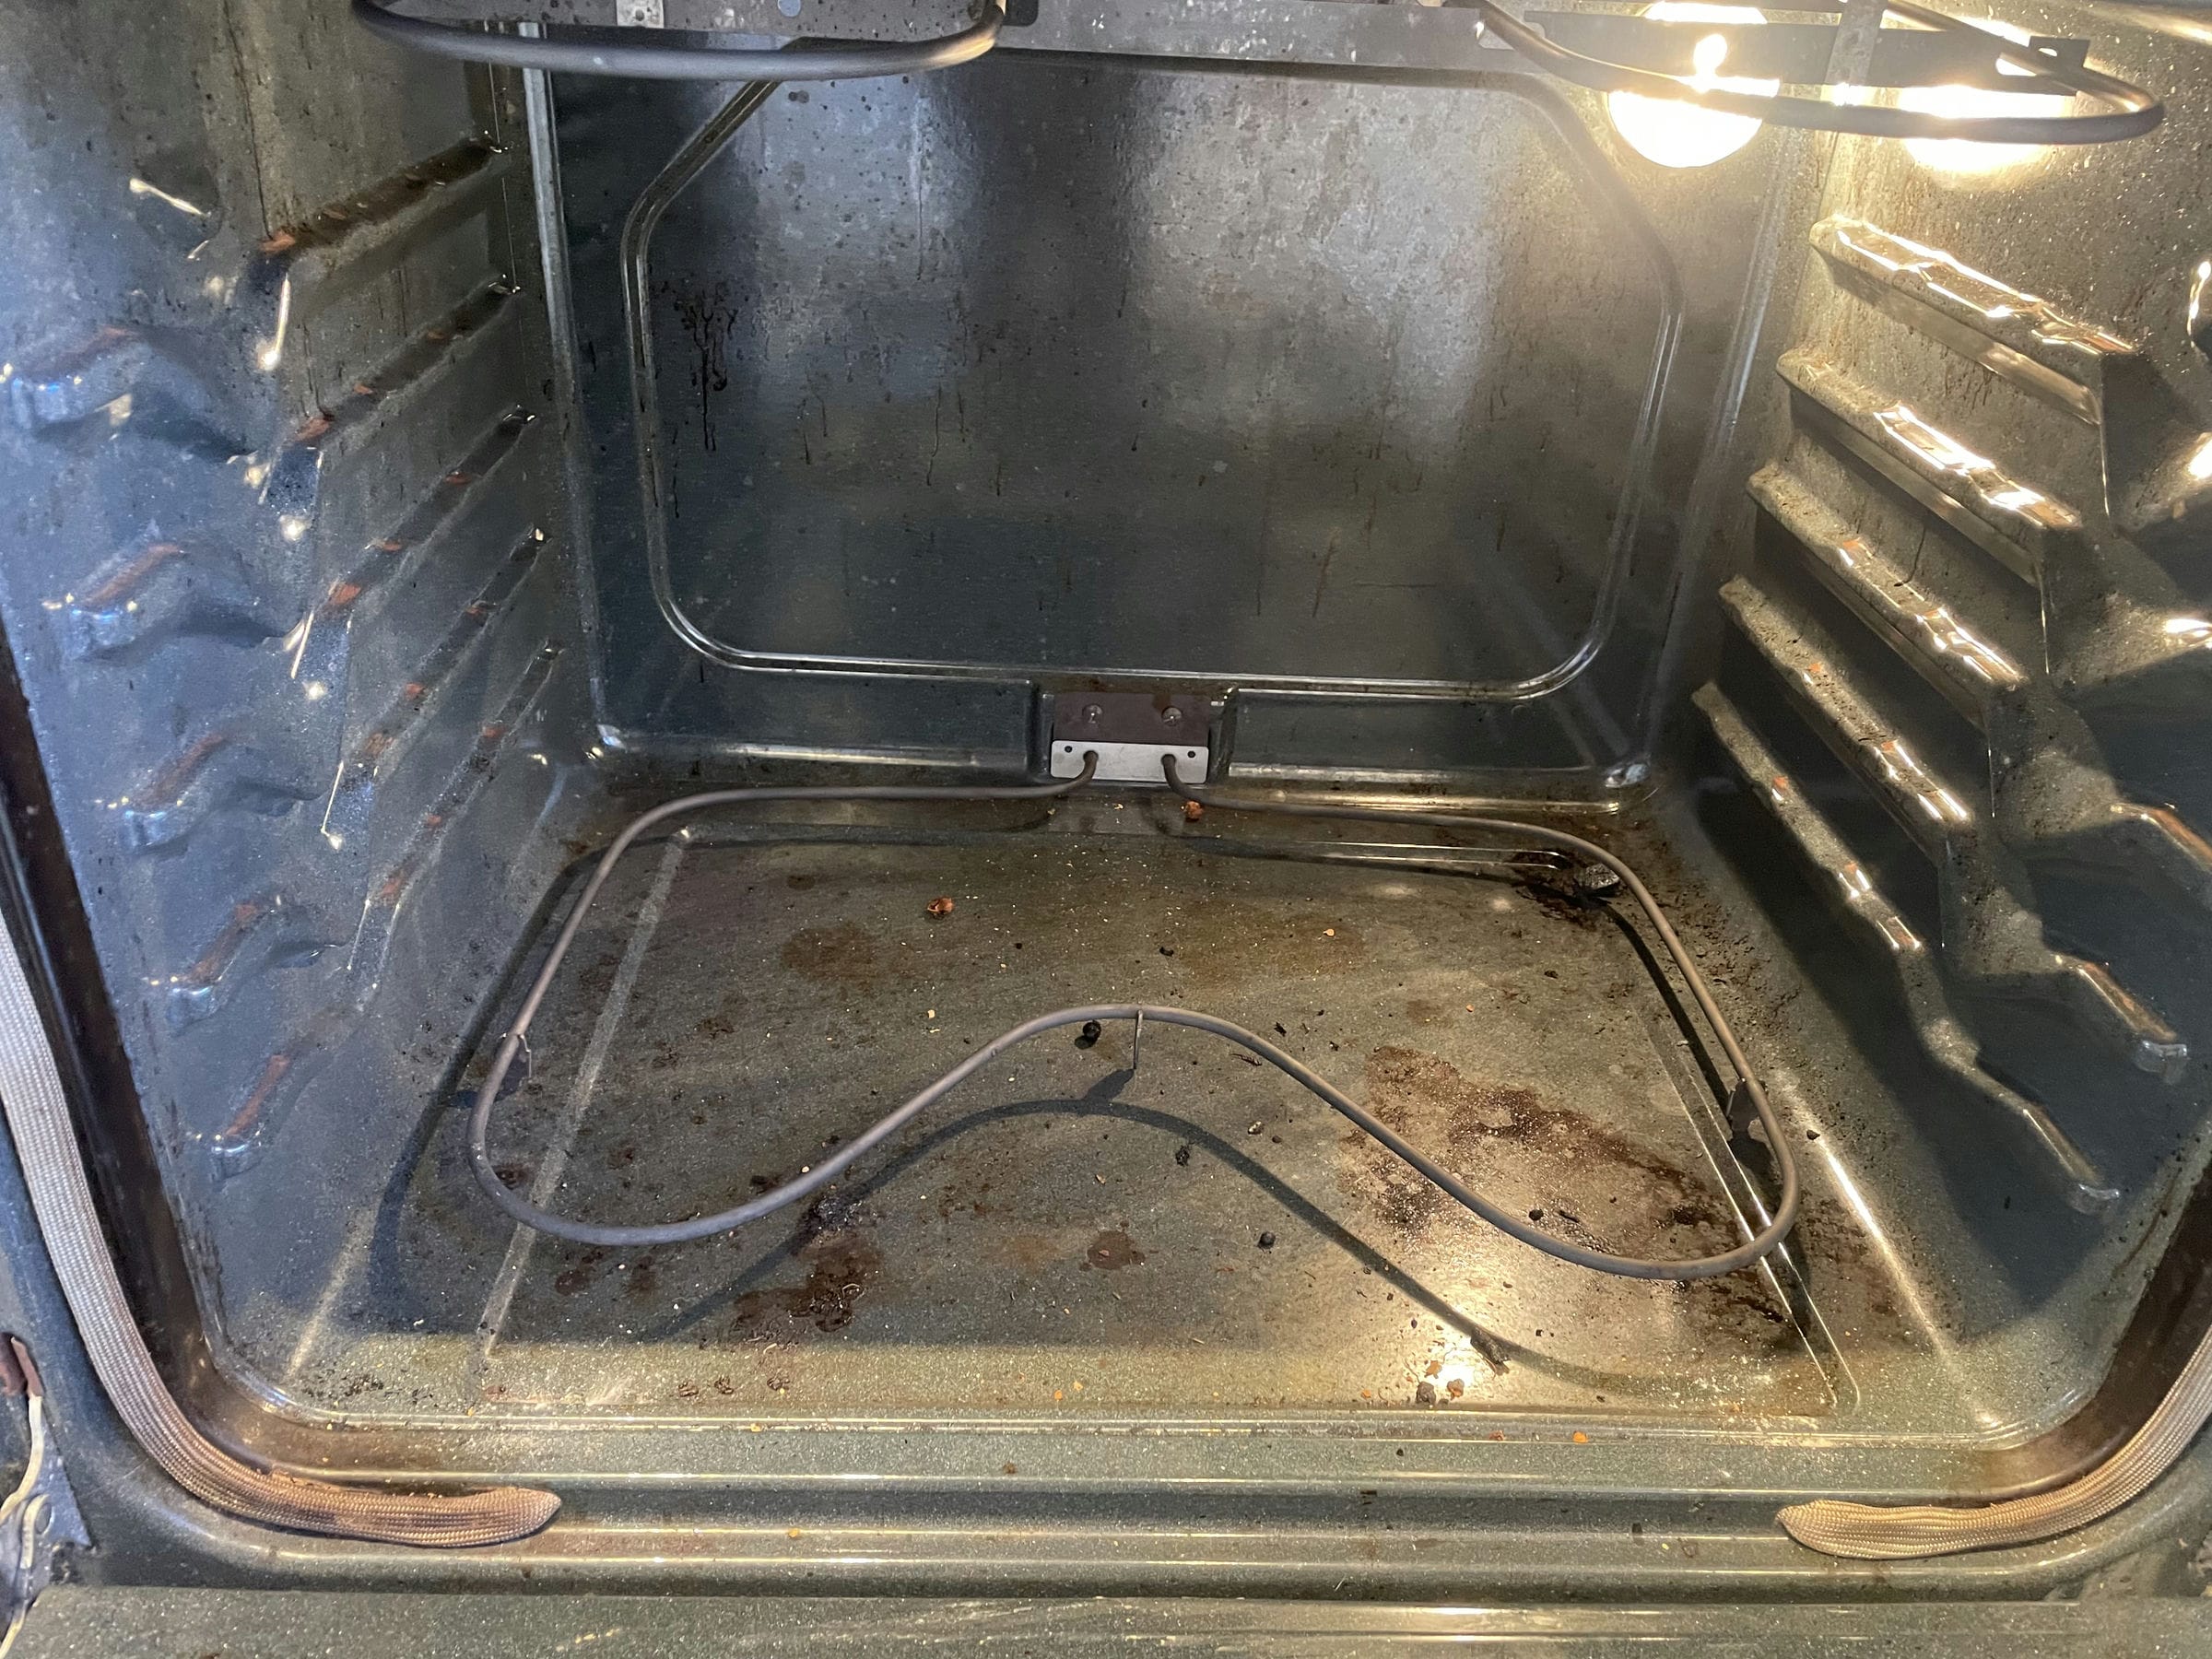 Happy home maid service oven before